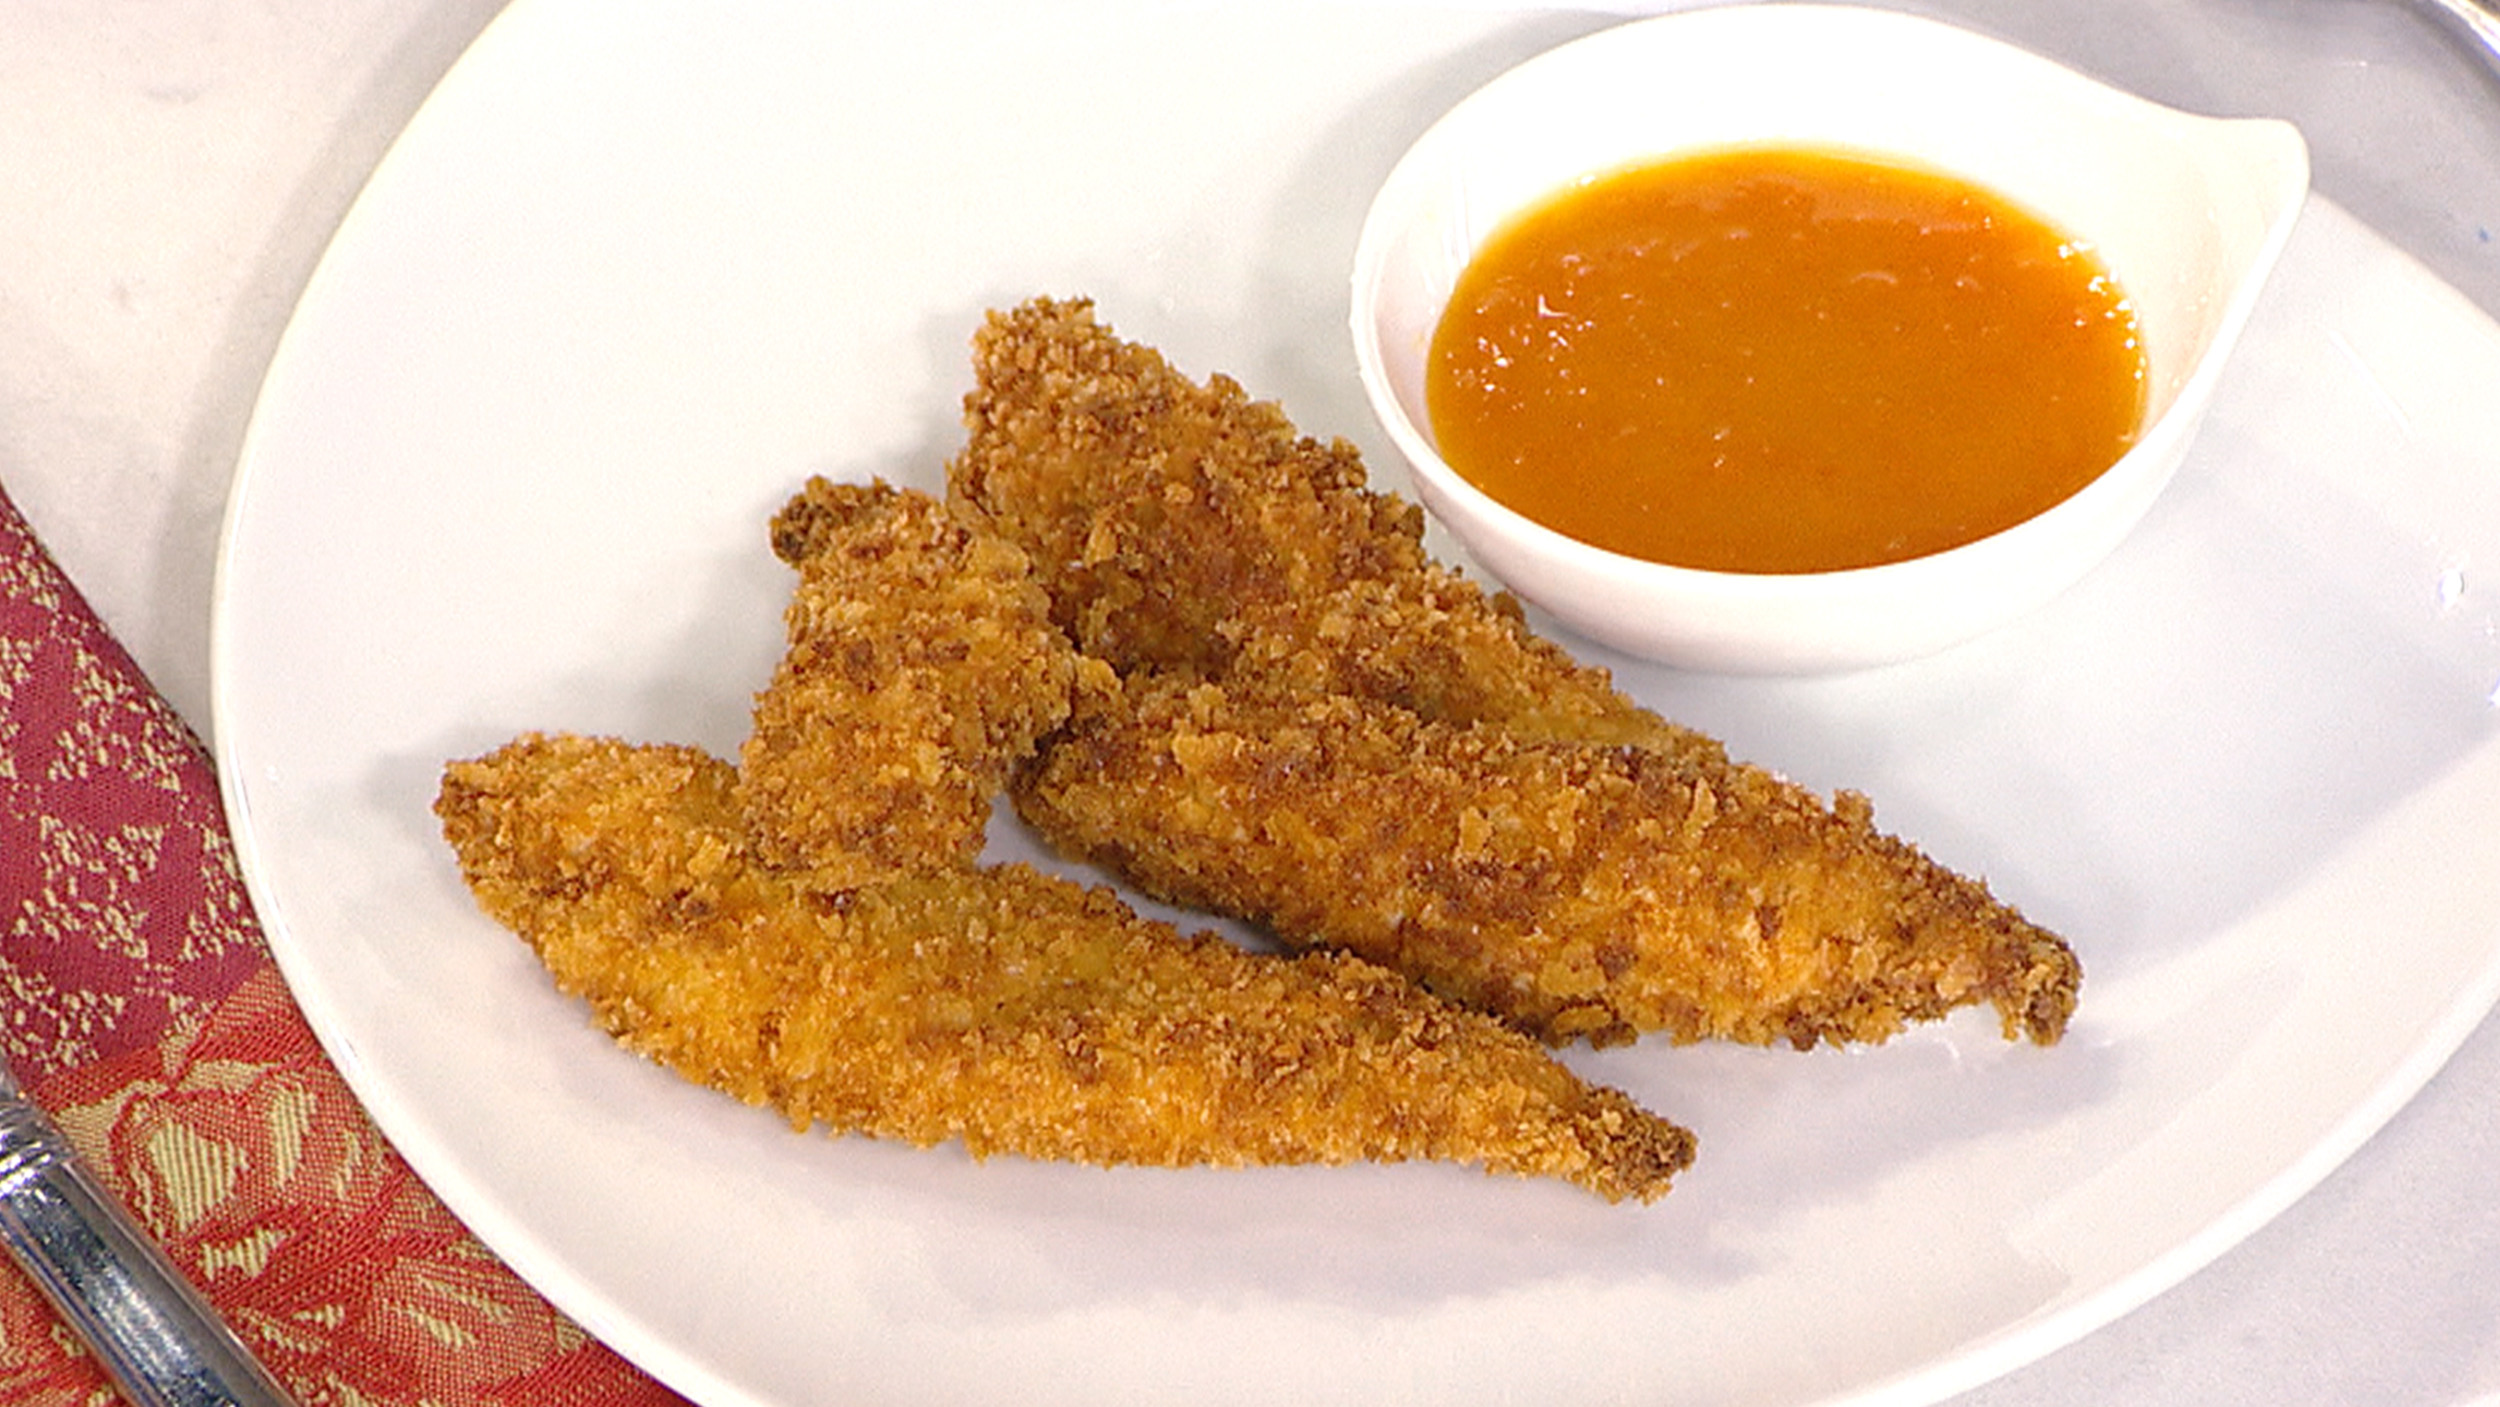 Chicken Tenders For Kids
 Your kids will love these homemade chicken tenders with